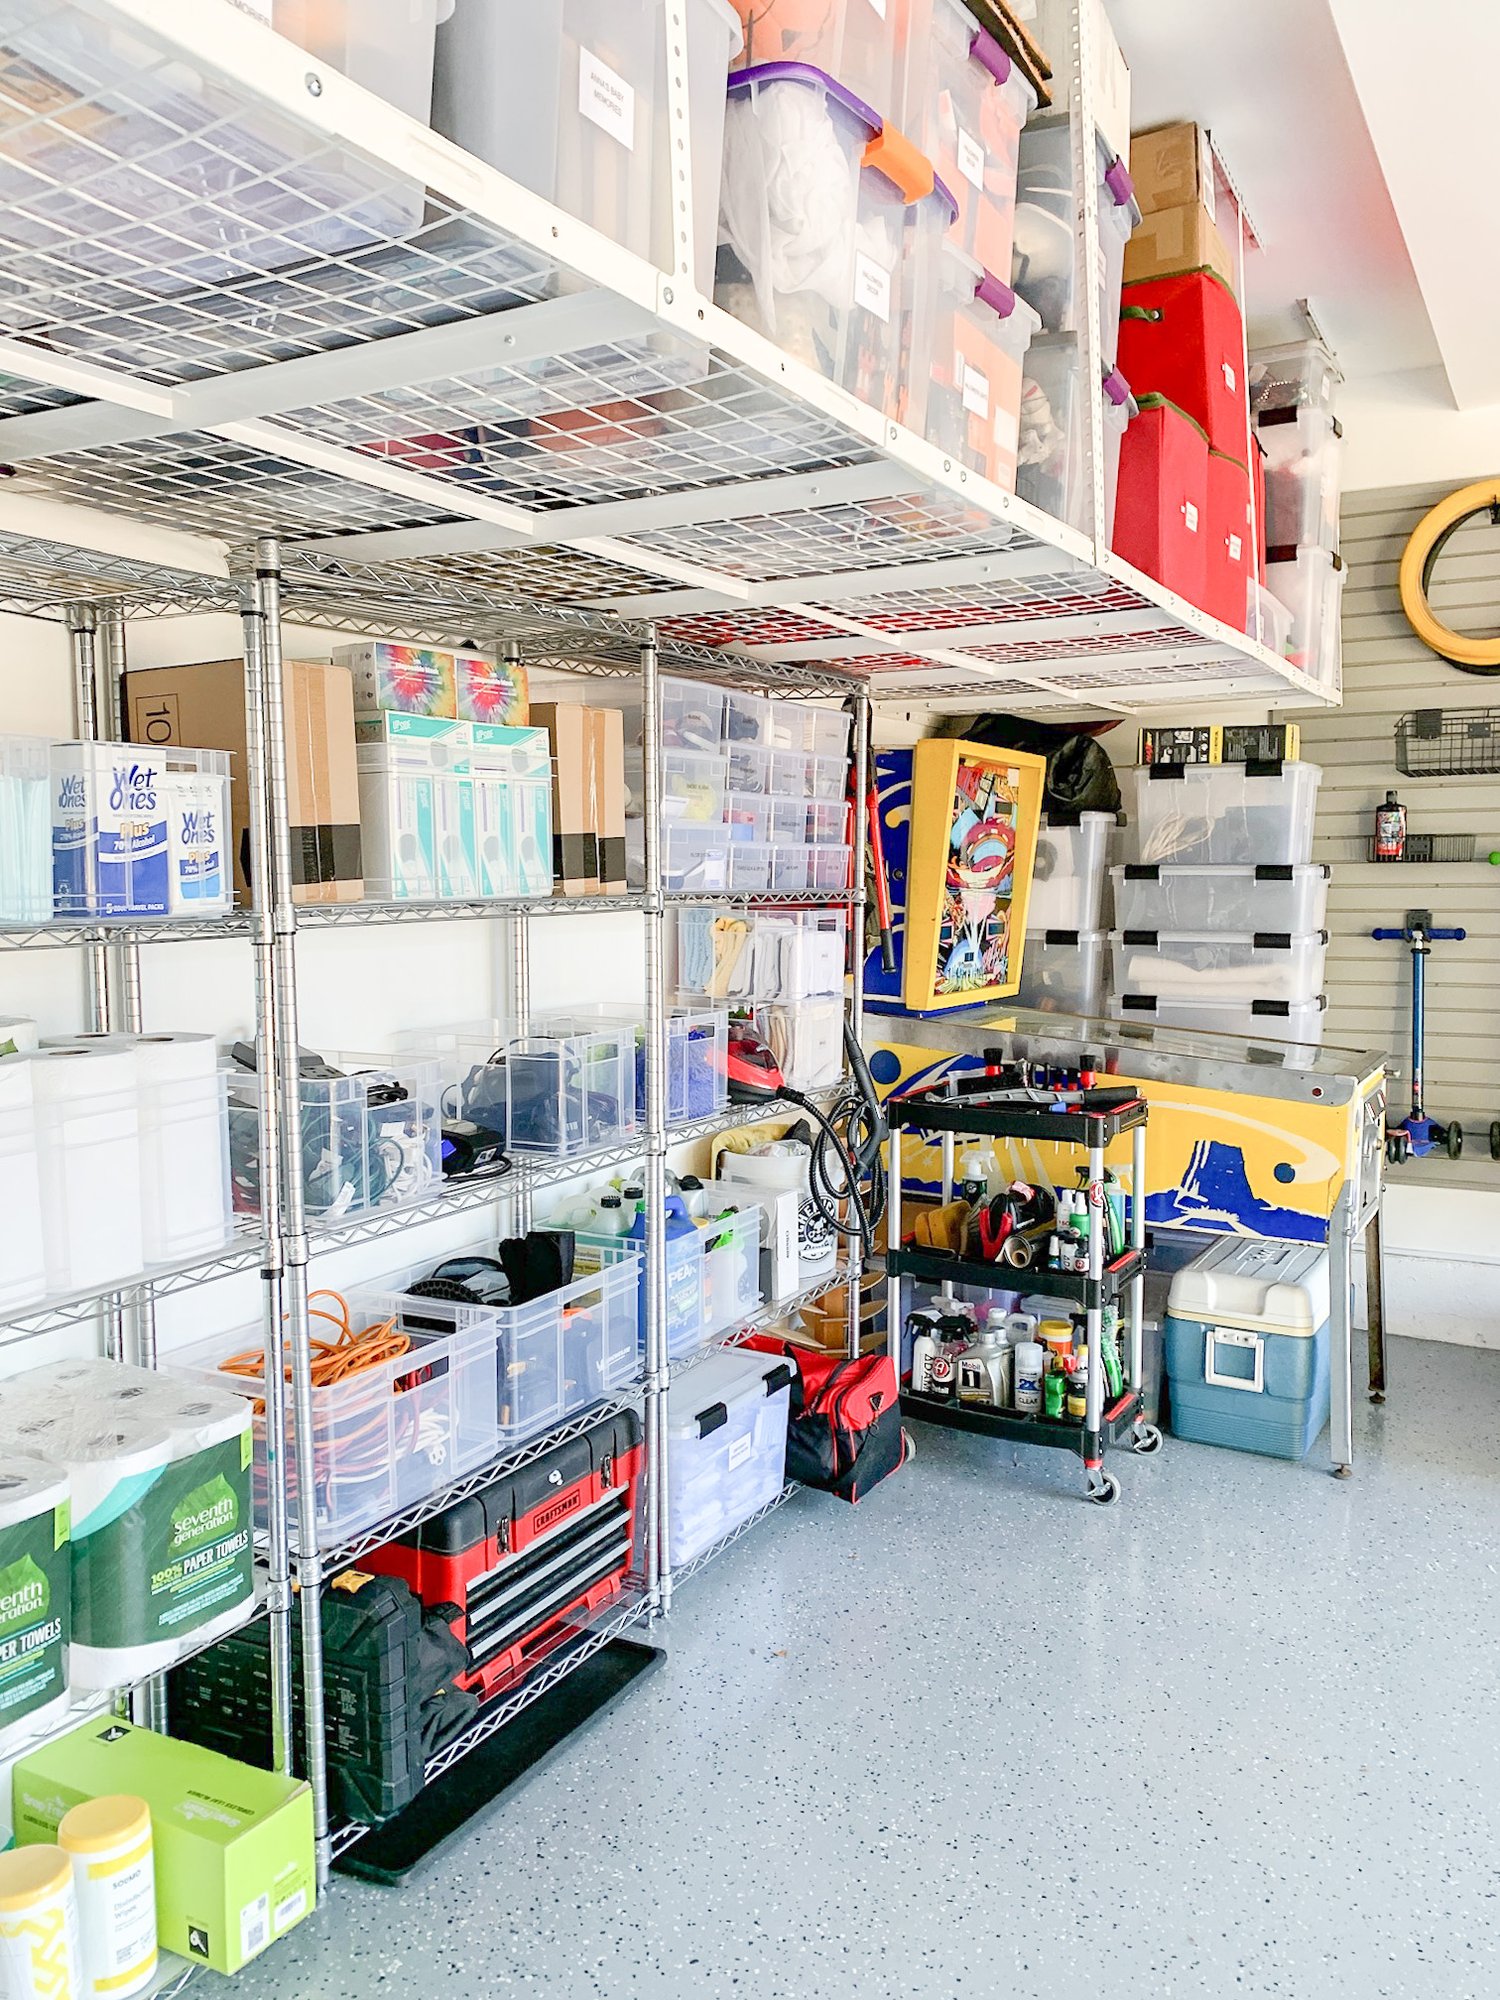 Garage Organization Tips  Ideas, Examples, and More